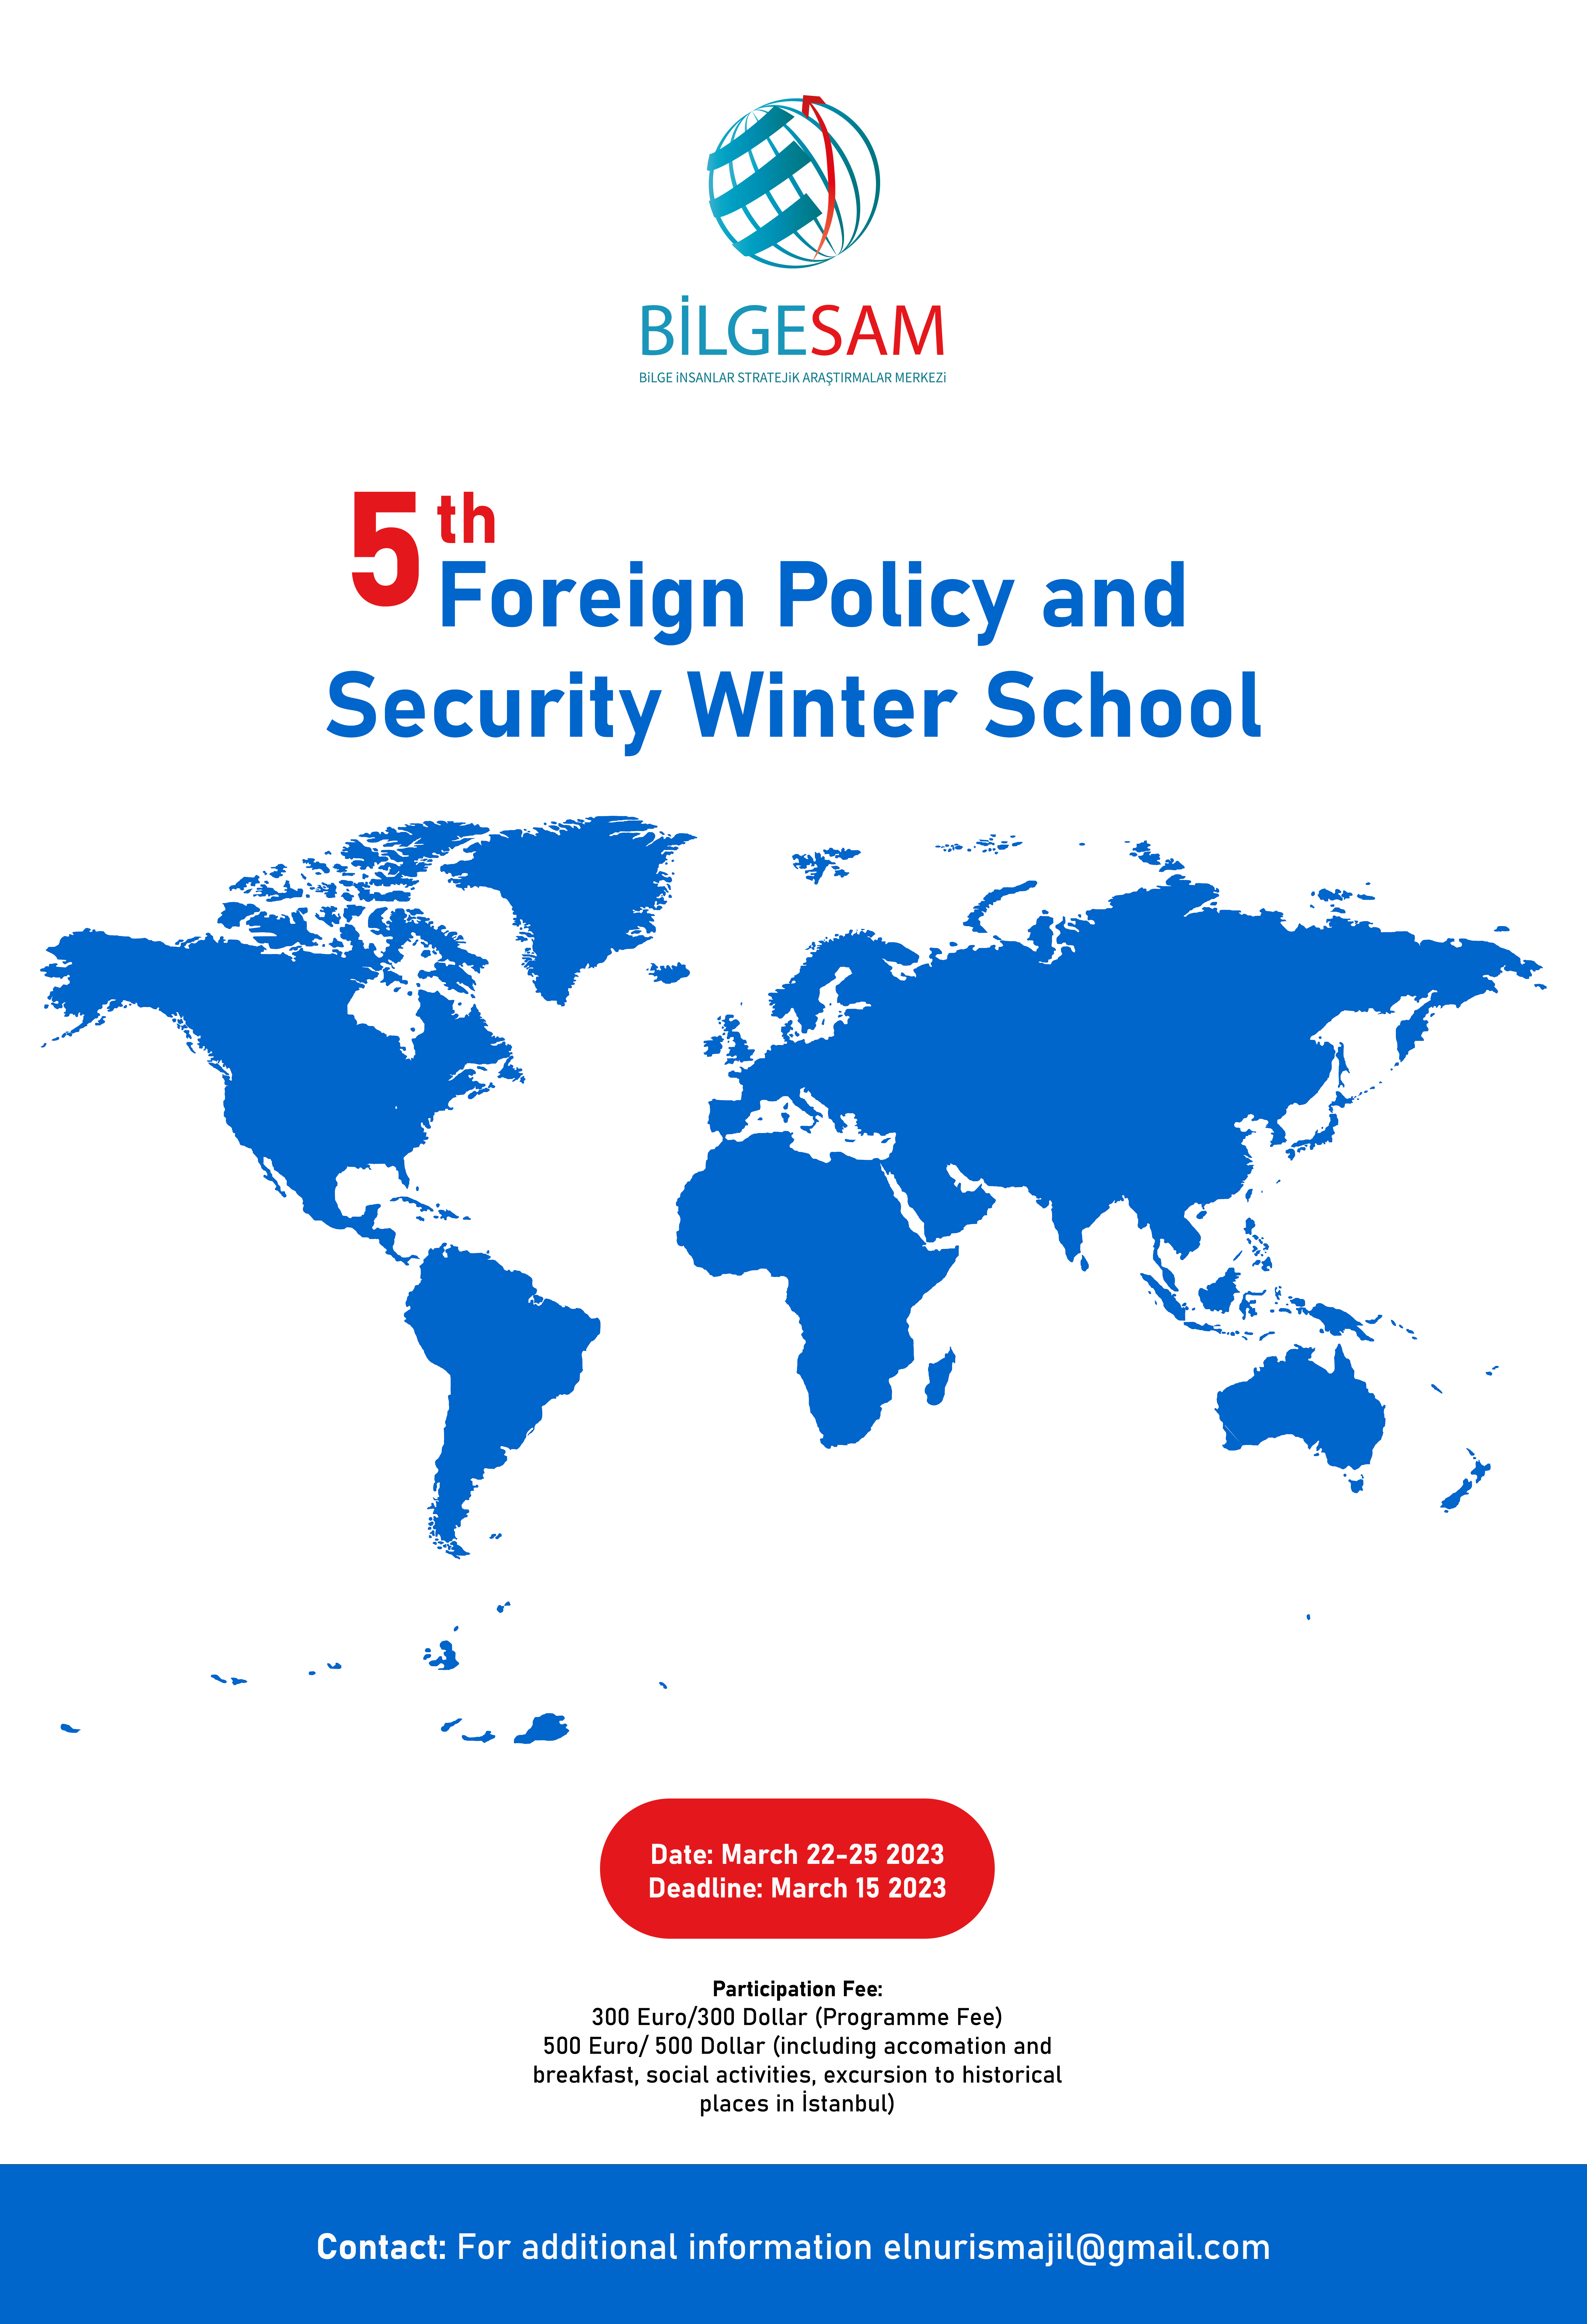 5th Foreign Policy and Security Winter School